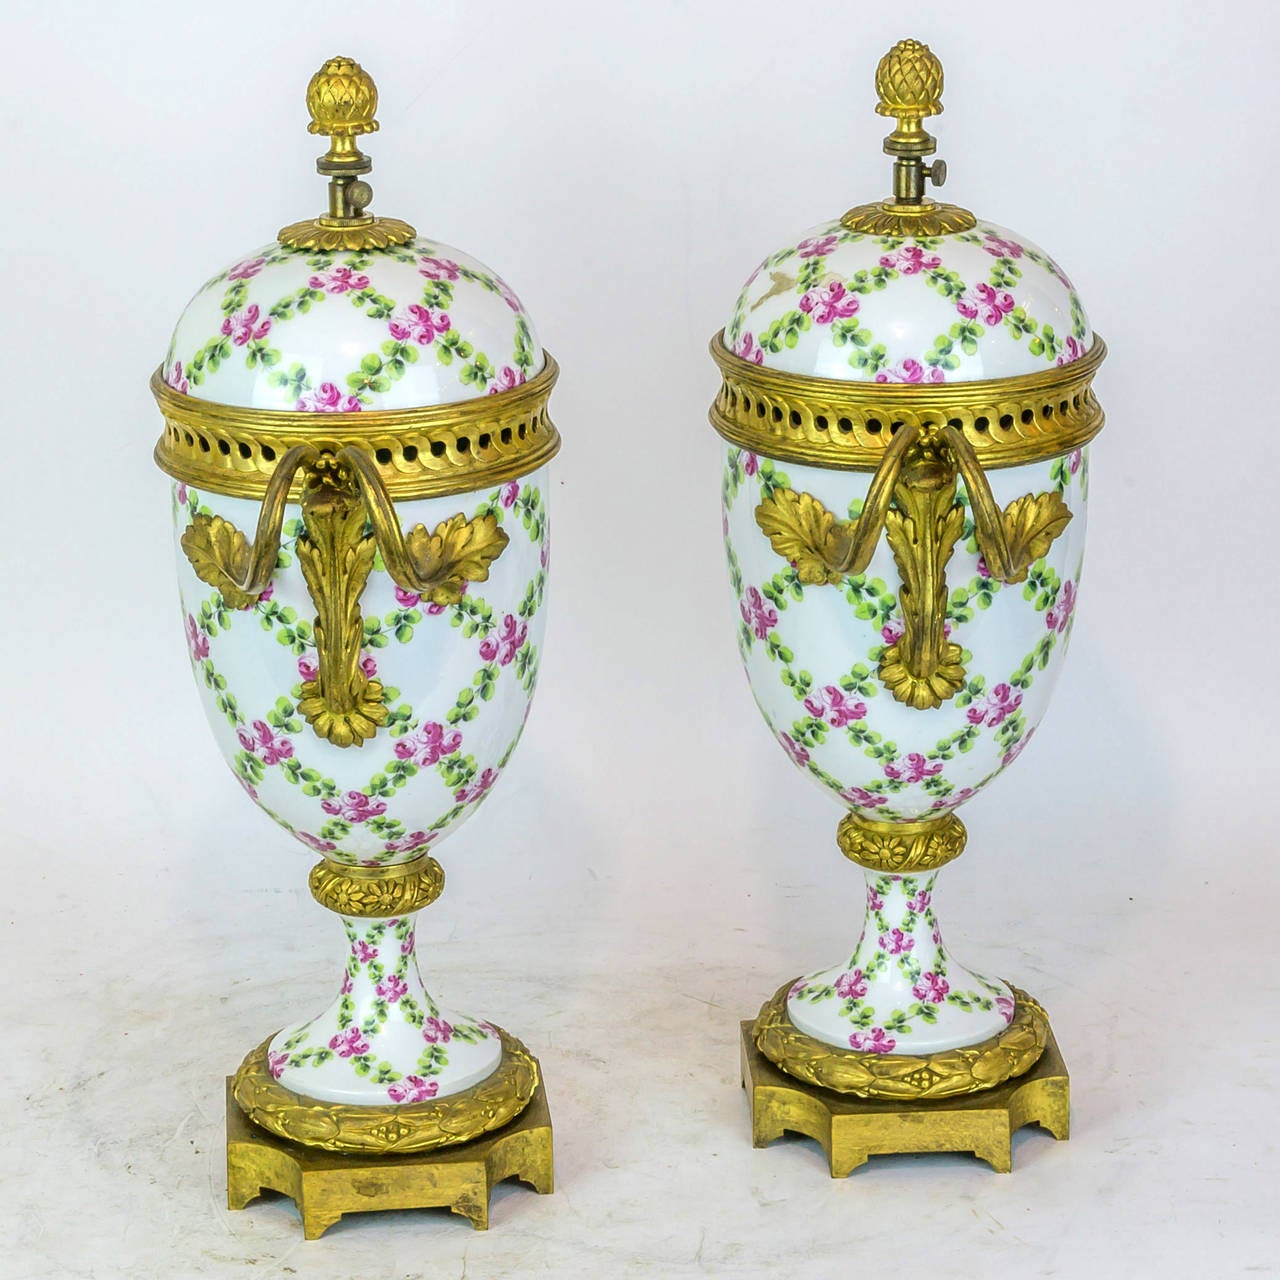 19th Century Pair of Floral Painted Porcelain and Bronze Covered Urns